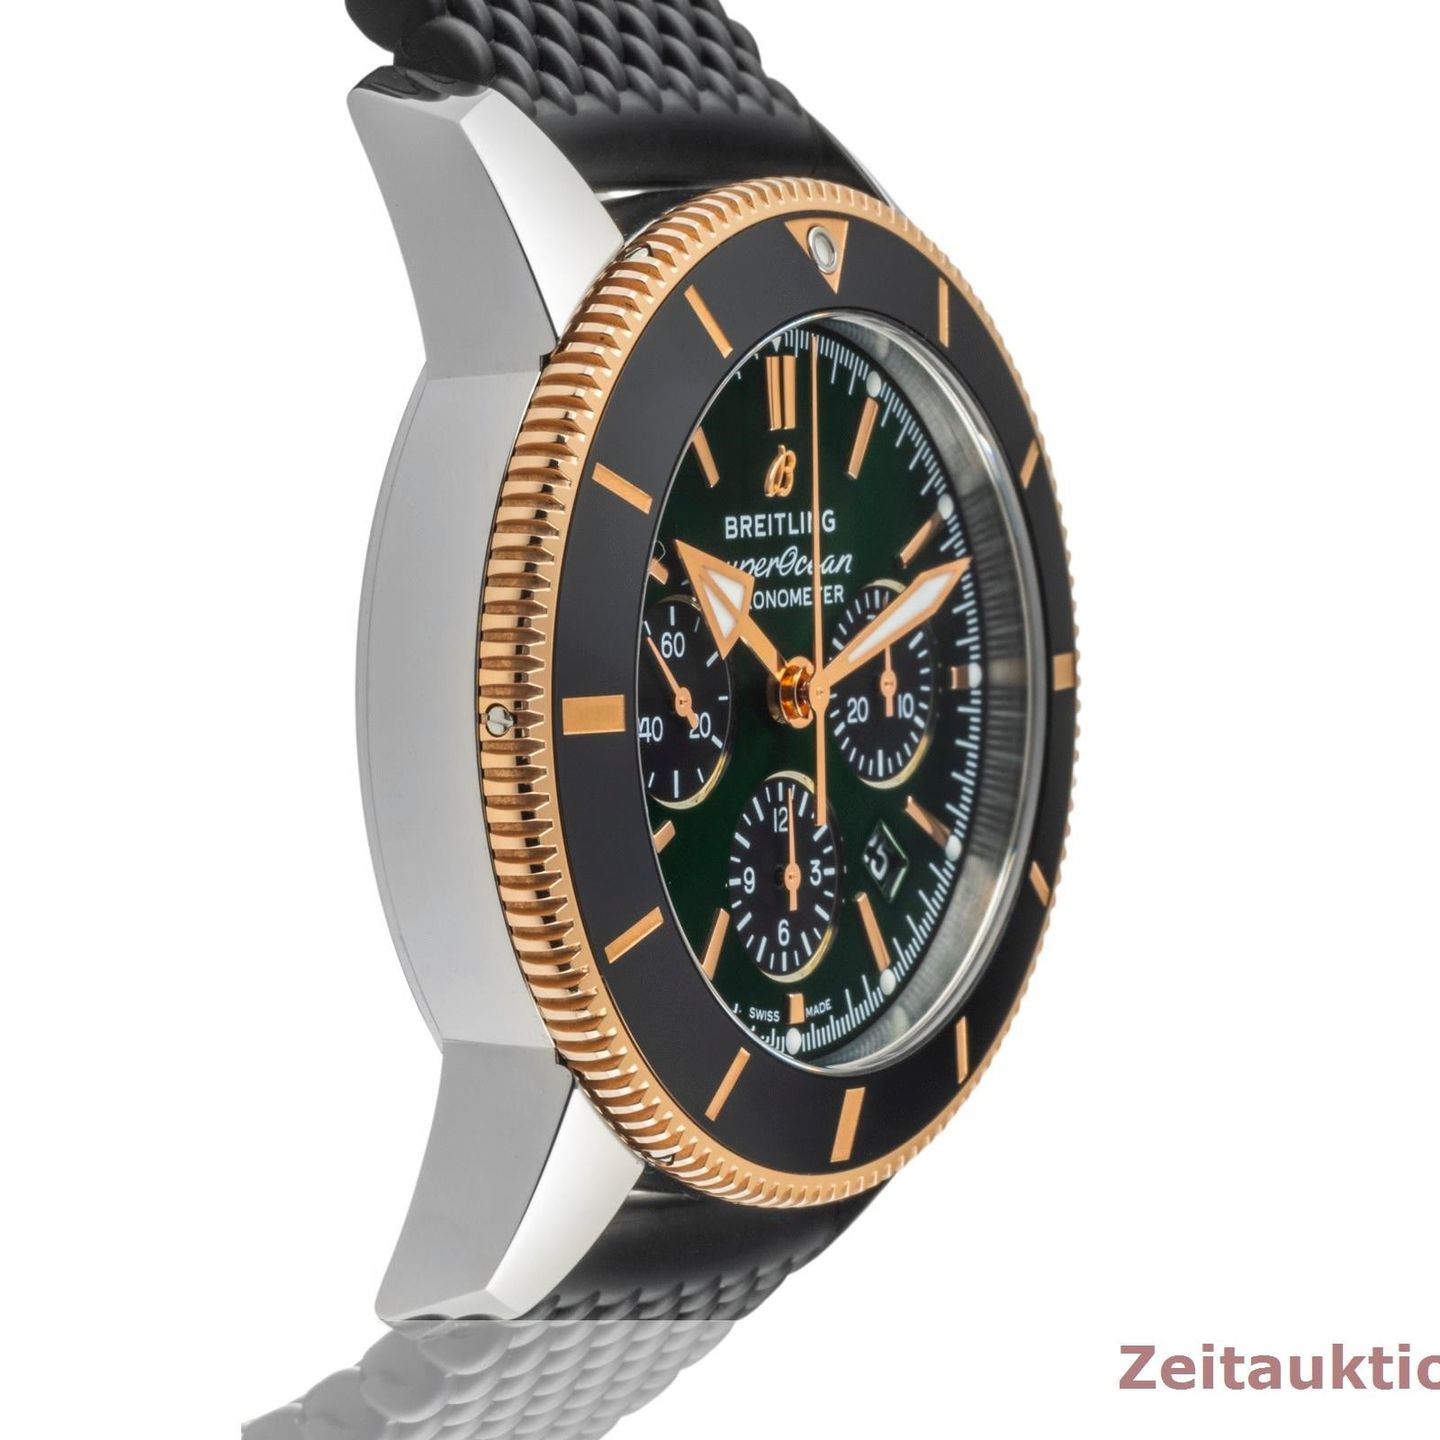 Breitling Superocean Heritage II Chronograph UB01622A1L1S1 (2022) - Green dial 44 mm Steel case (7/8)